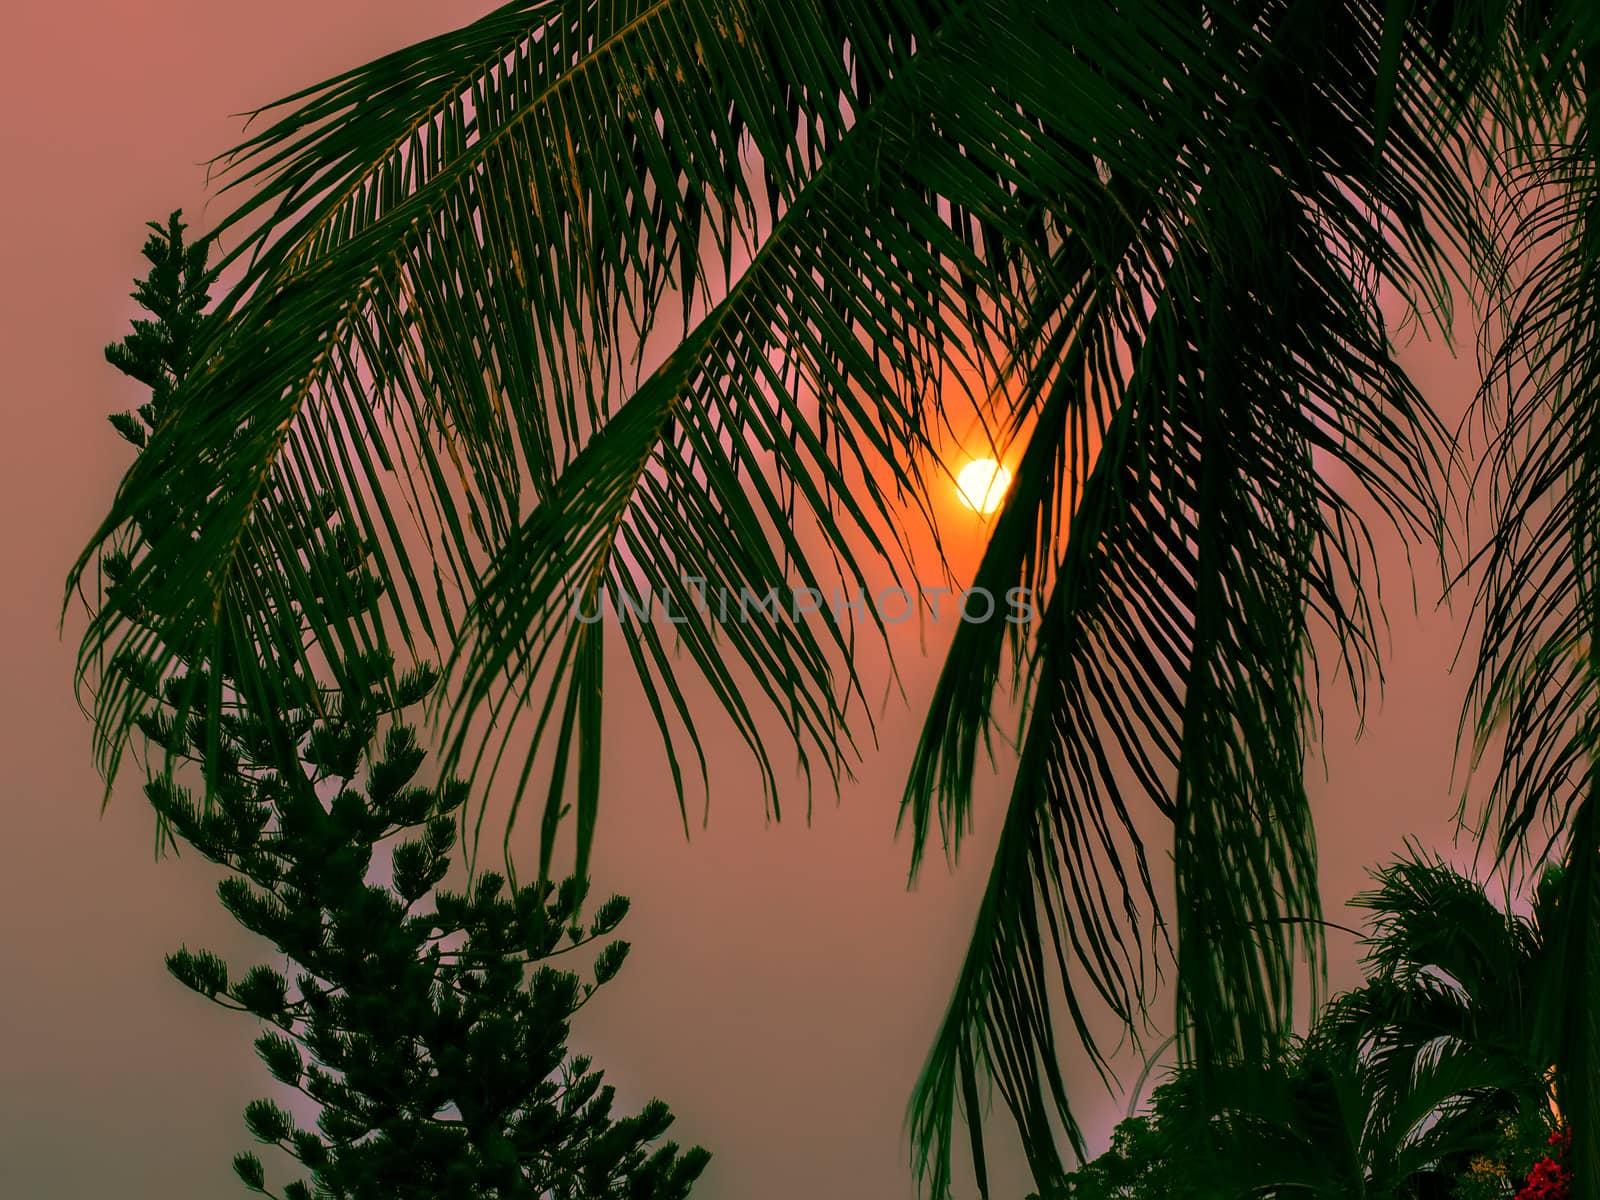 Behind branches of the palm tree. Thailand.